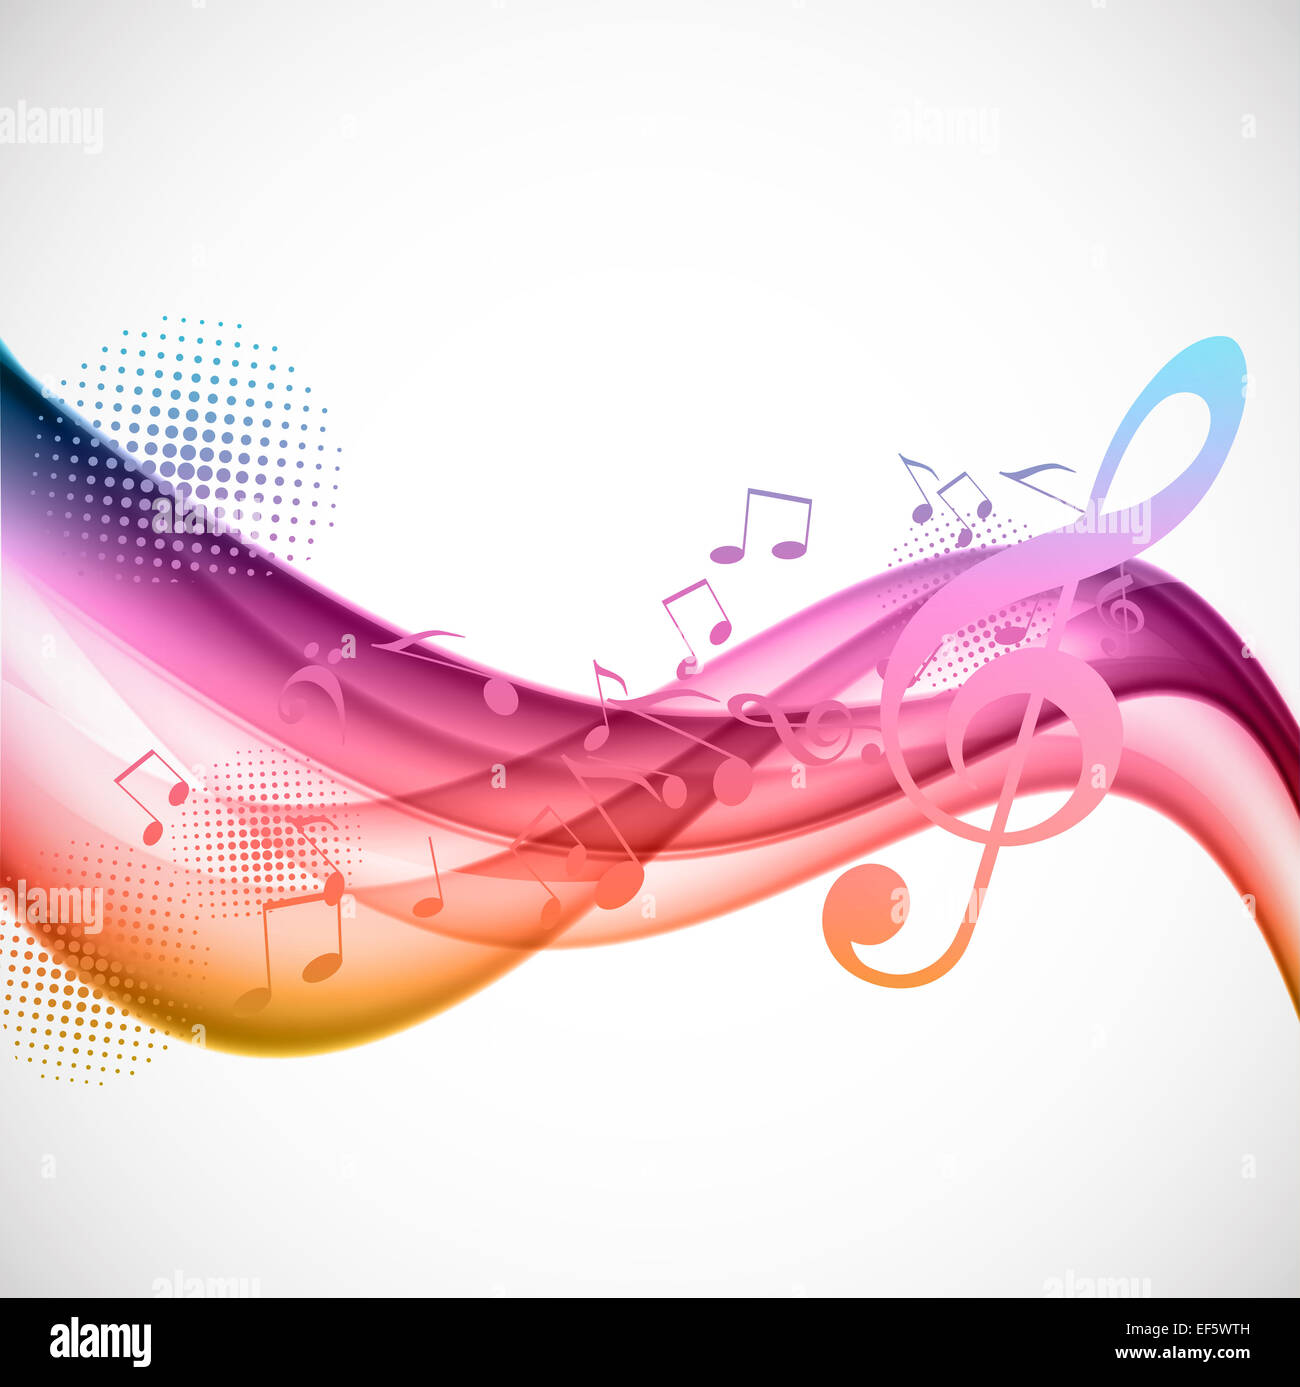 Colorful music background Stock Photo